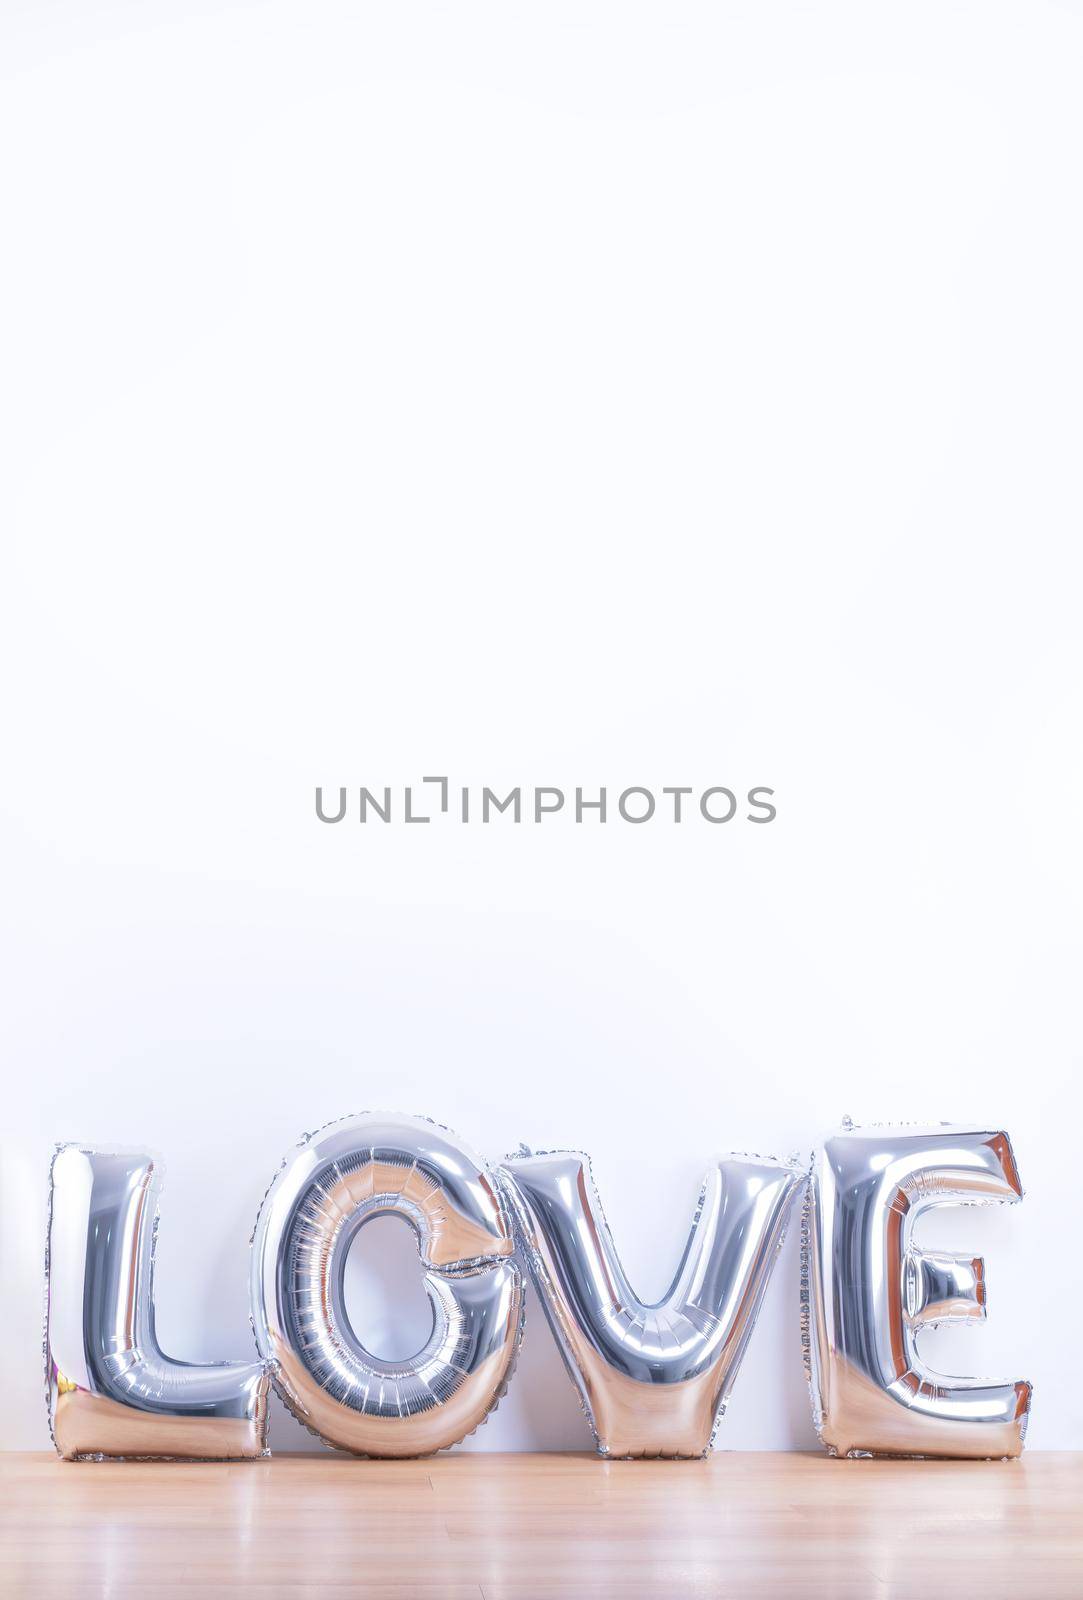 Valentine's day, Mother's day design concept - Beautiful balloon with word love shape on a light wooden floor and white wall background, close up. by ROMIXIMAGE